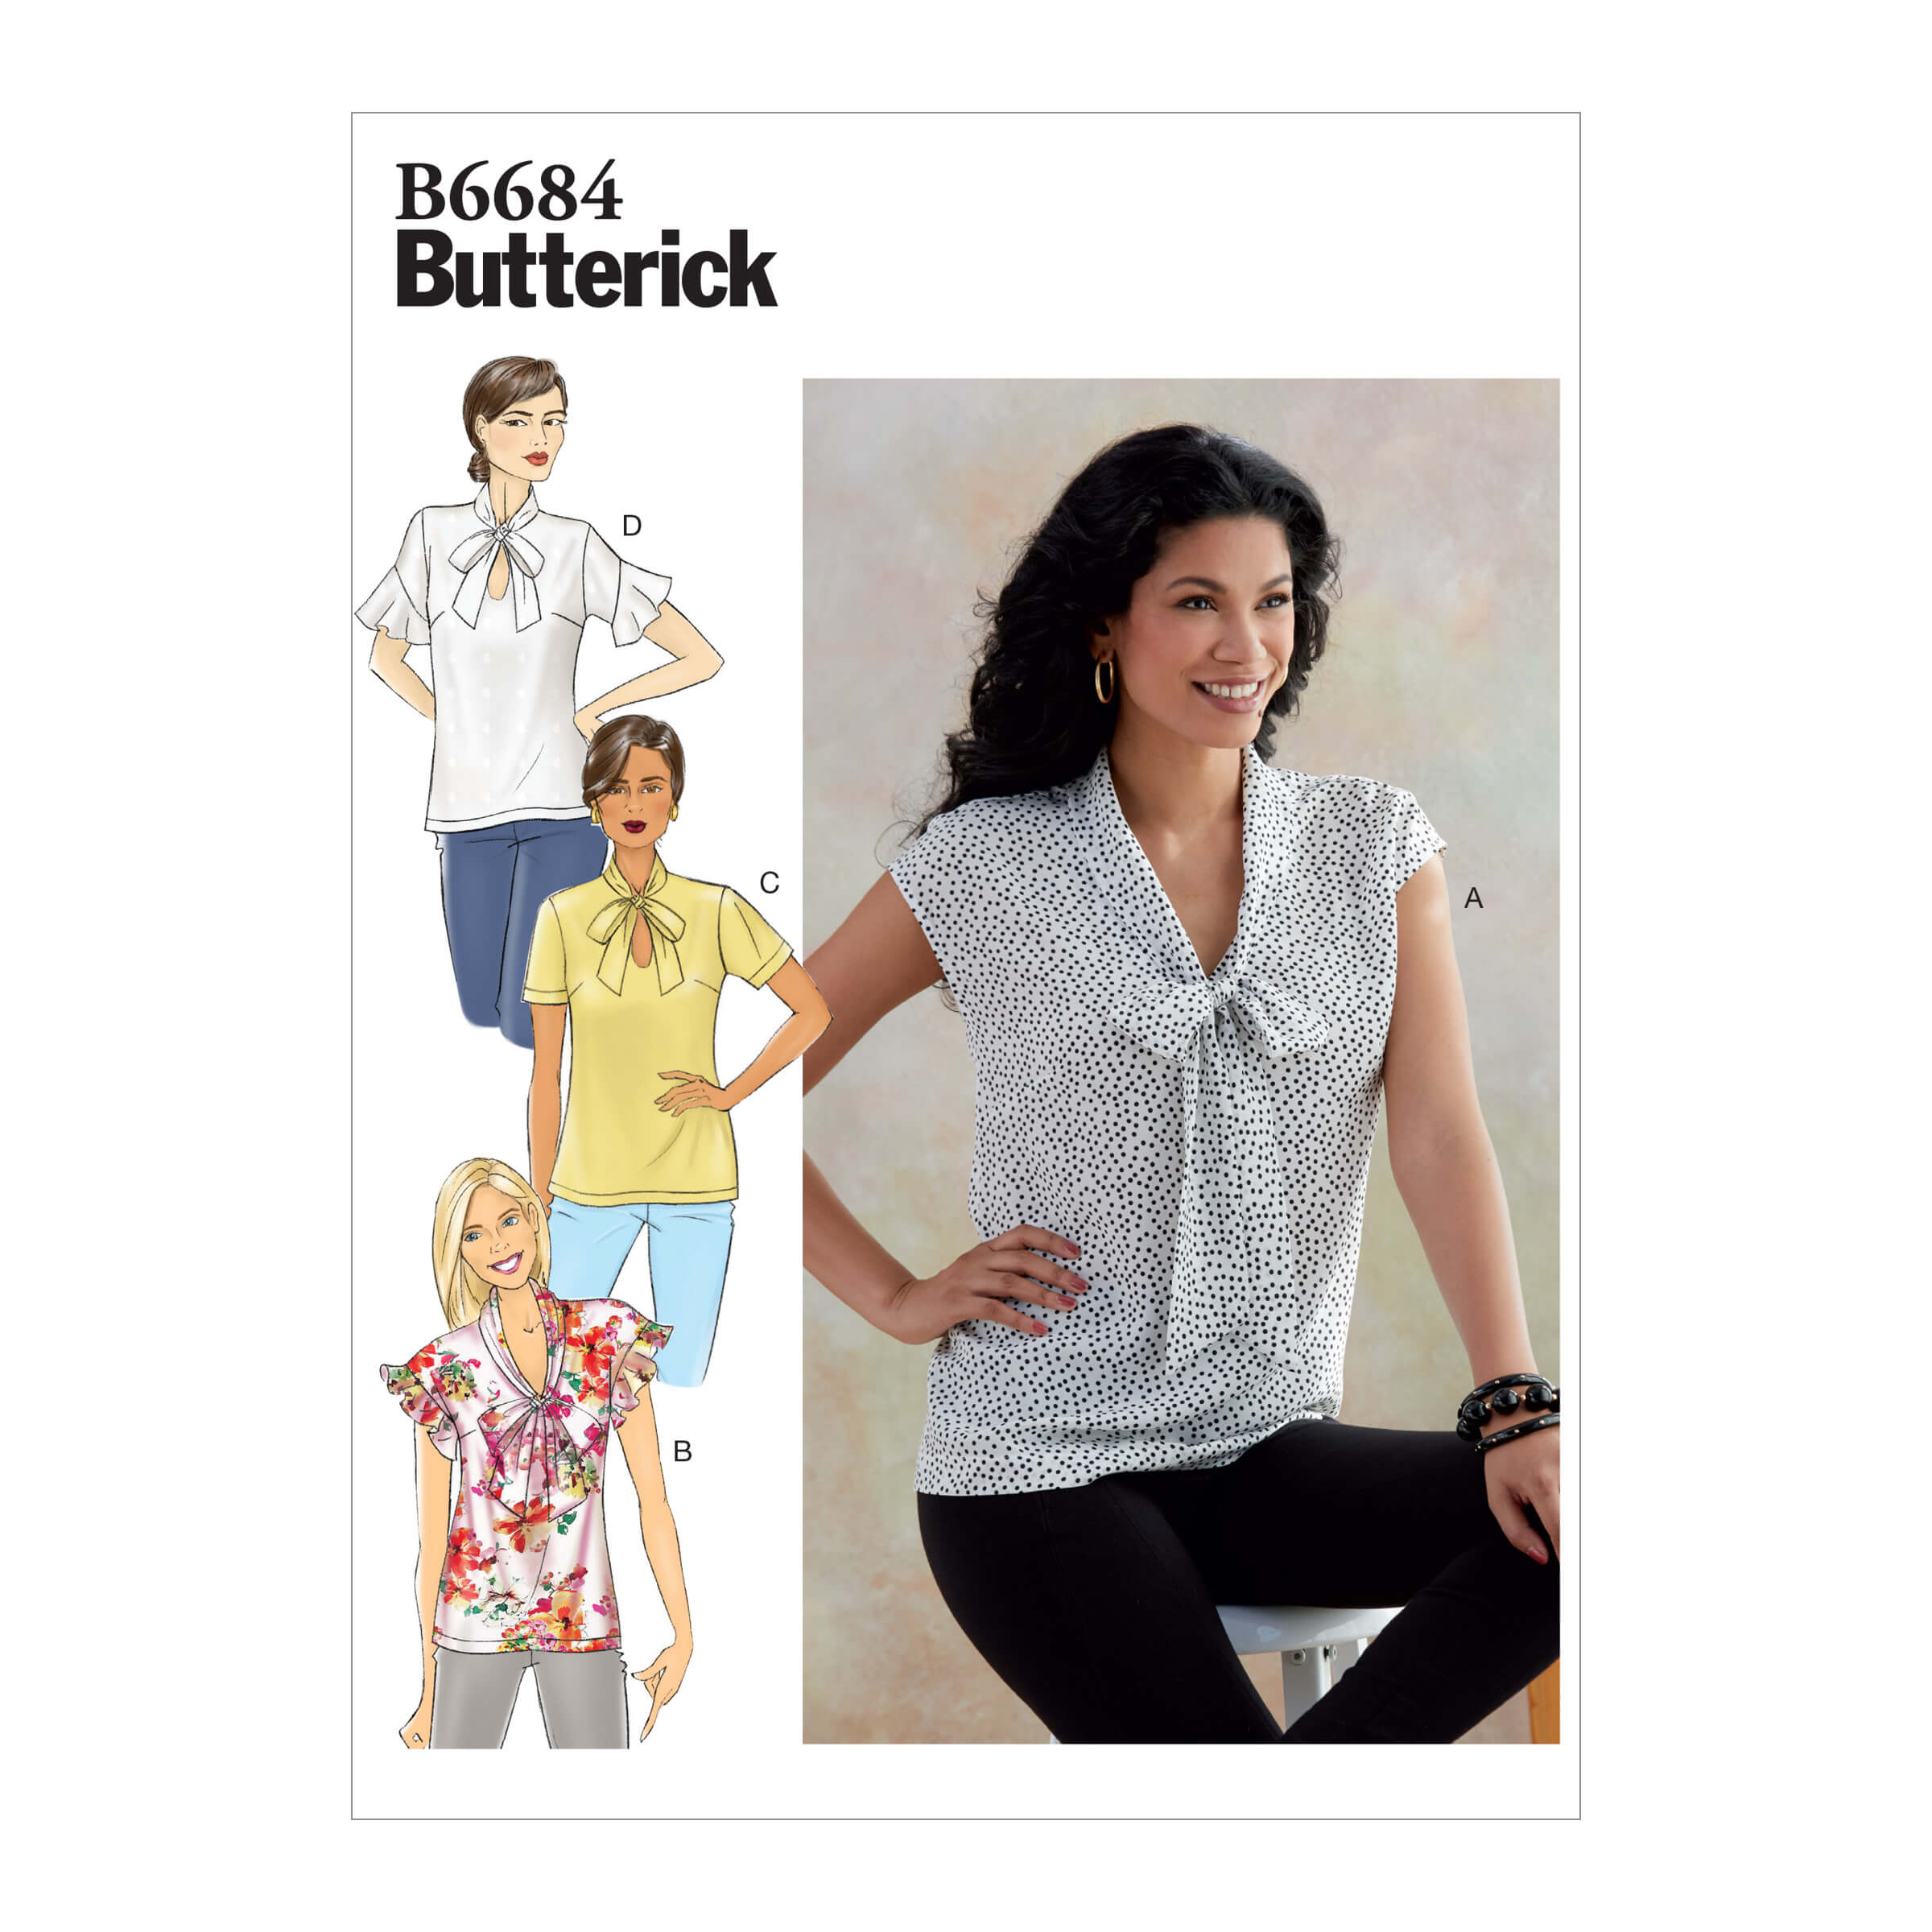 Butterick Sewing Pattern B6684 Misses' Top